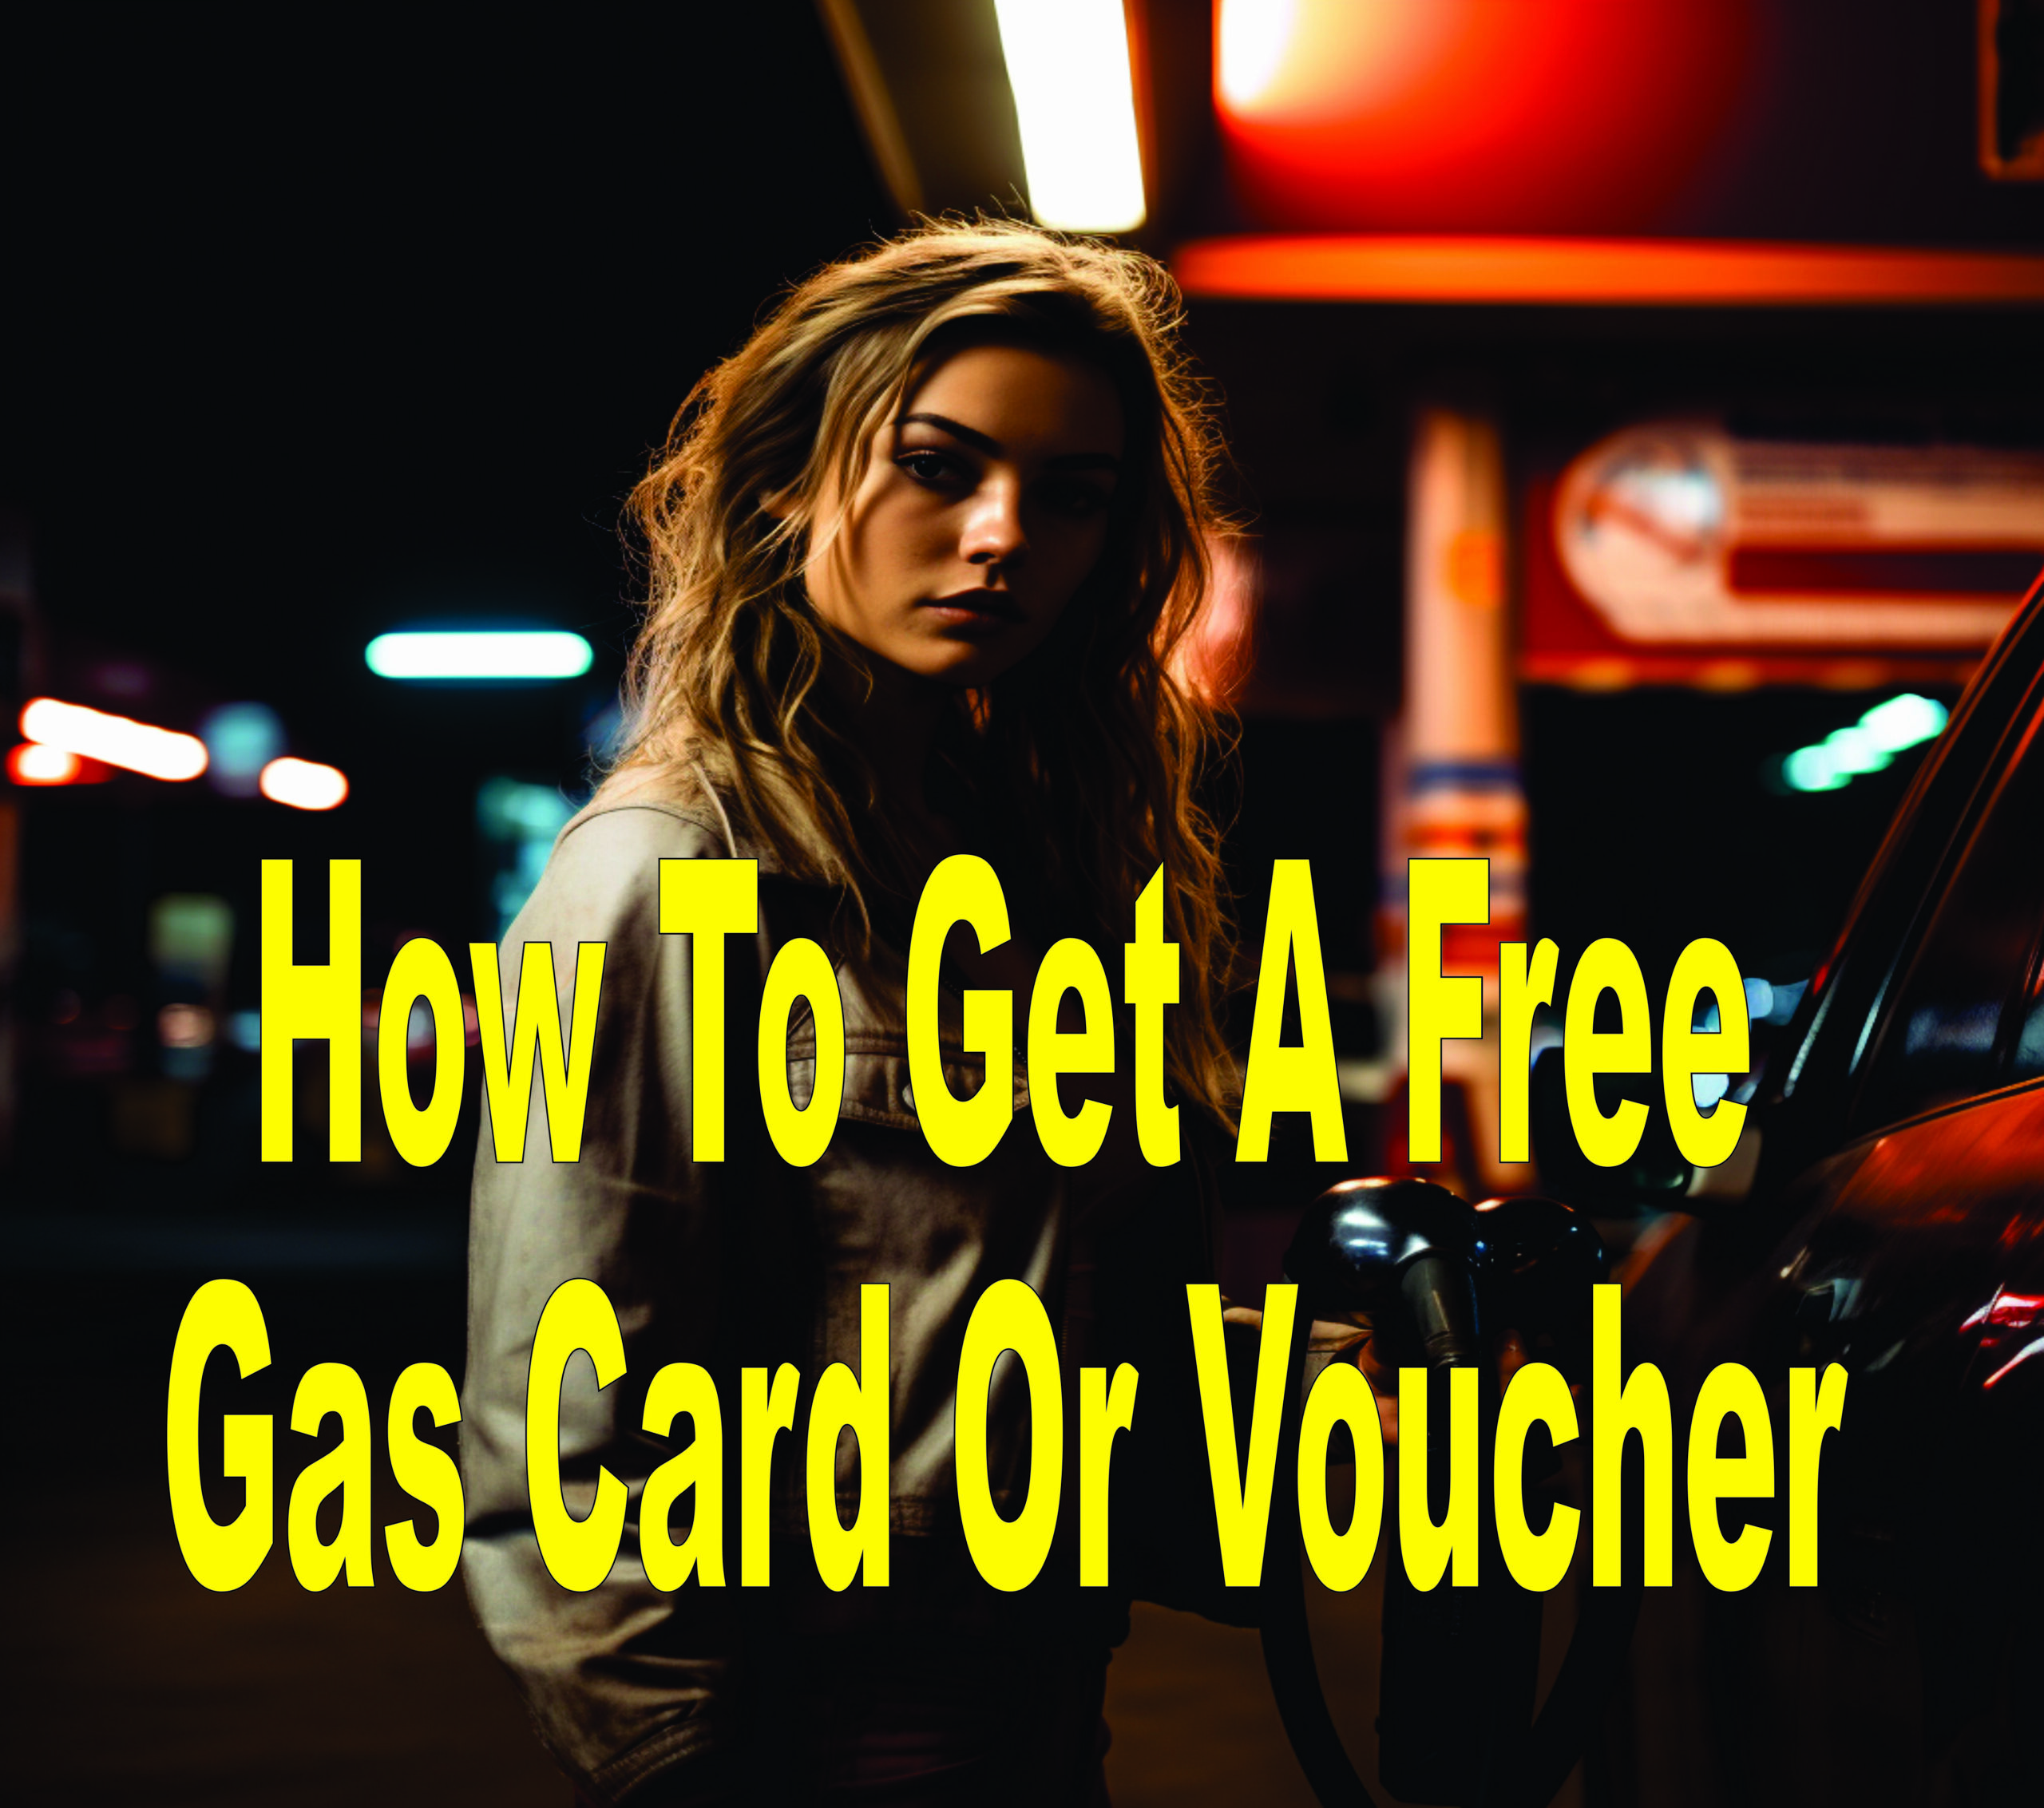 How To Get A Free Gas Card Or Voucher